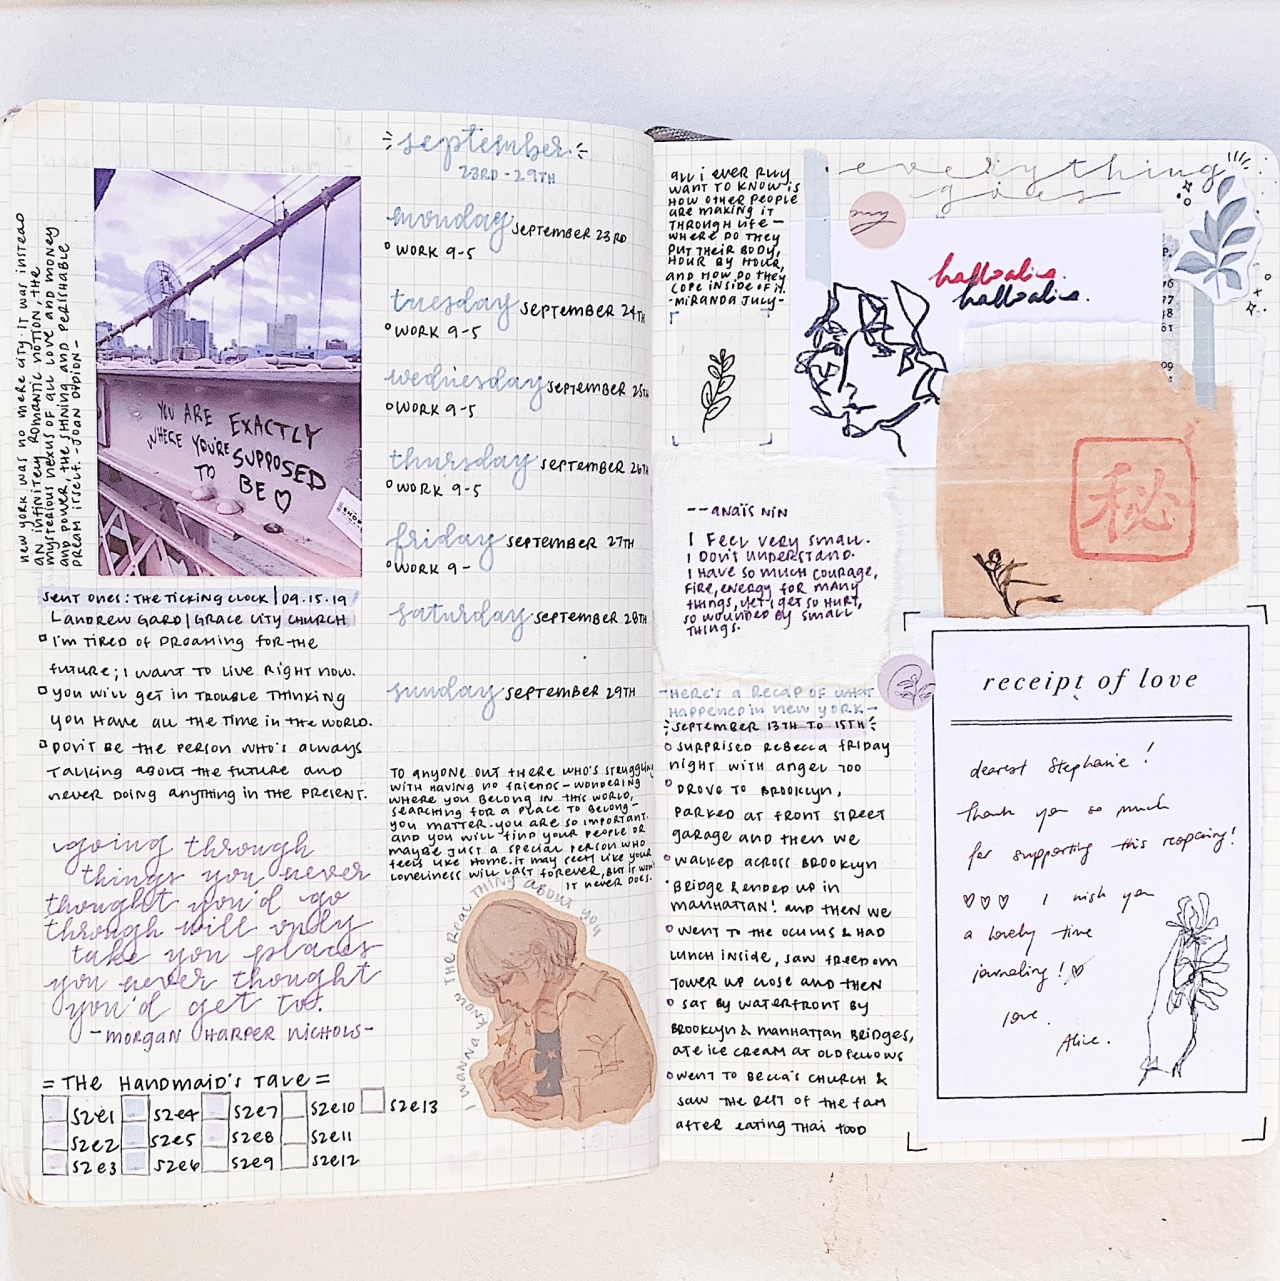 BULLET JOURNALS — stvdybuddies: Hey everyone! We wanted to take...